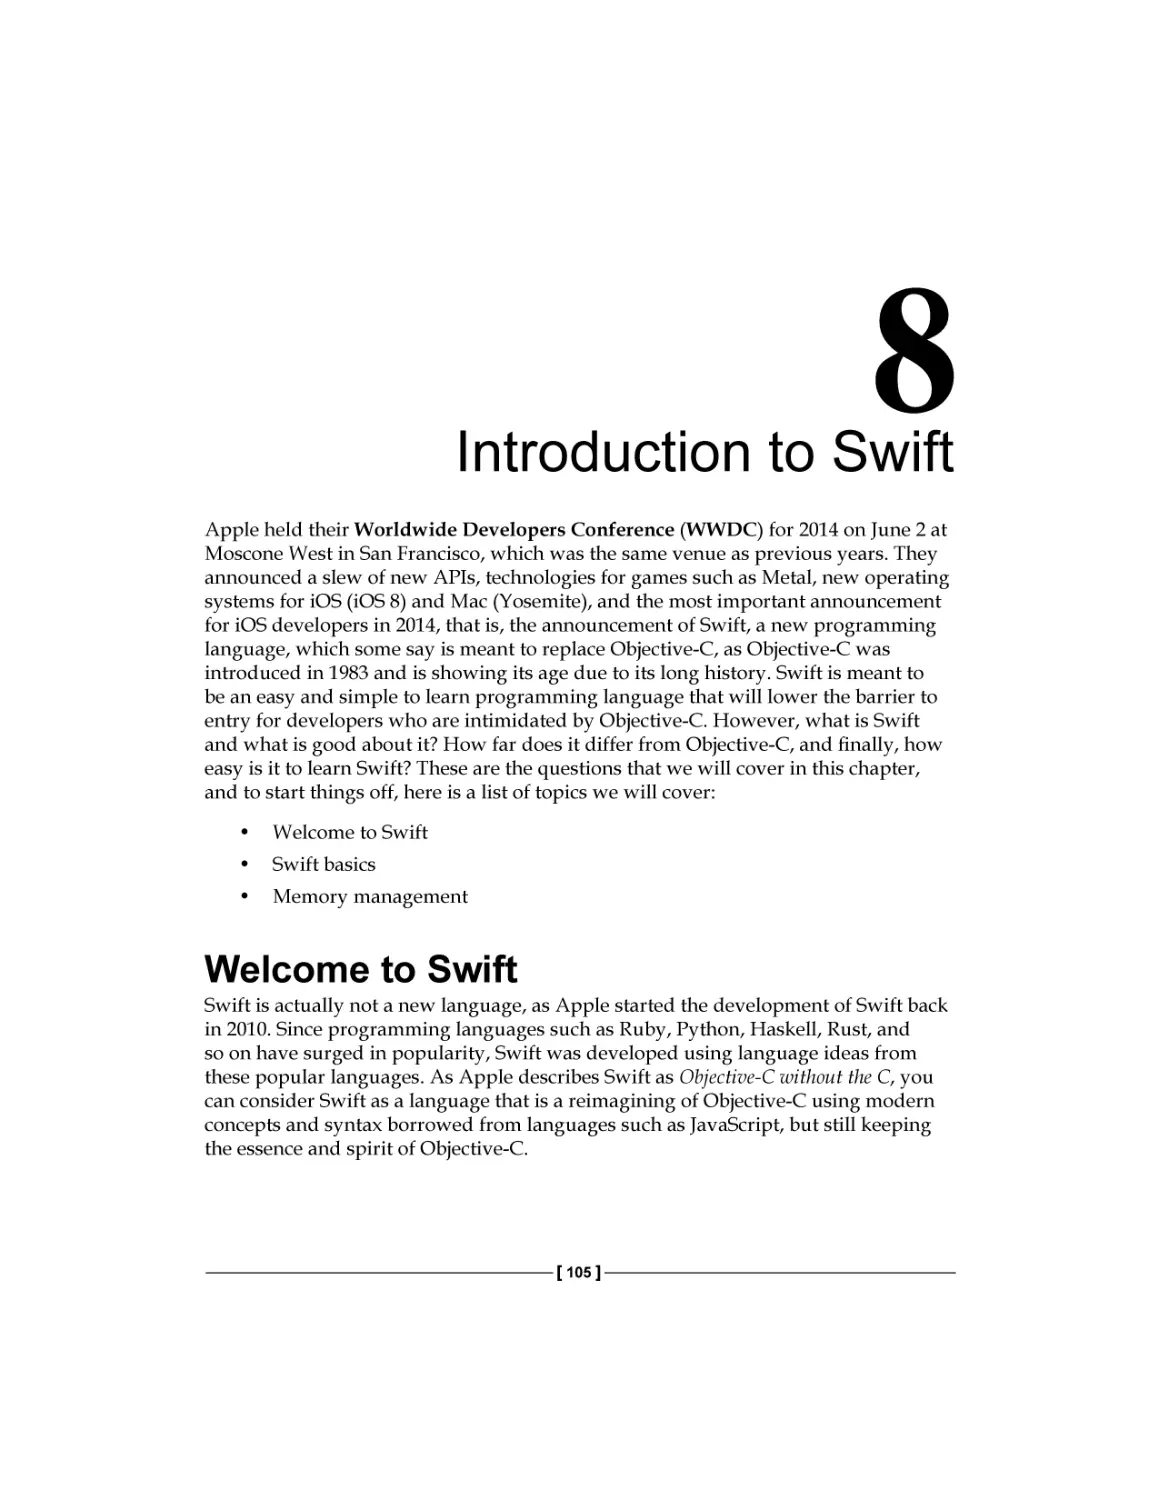 Chapter 8
Welcome to Swift